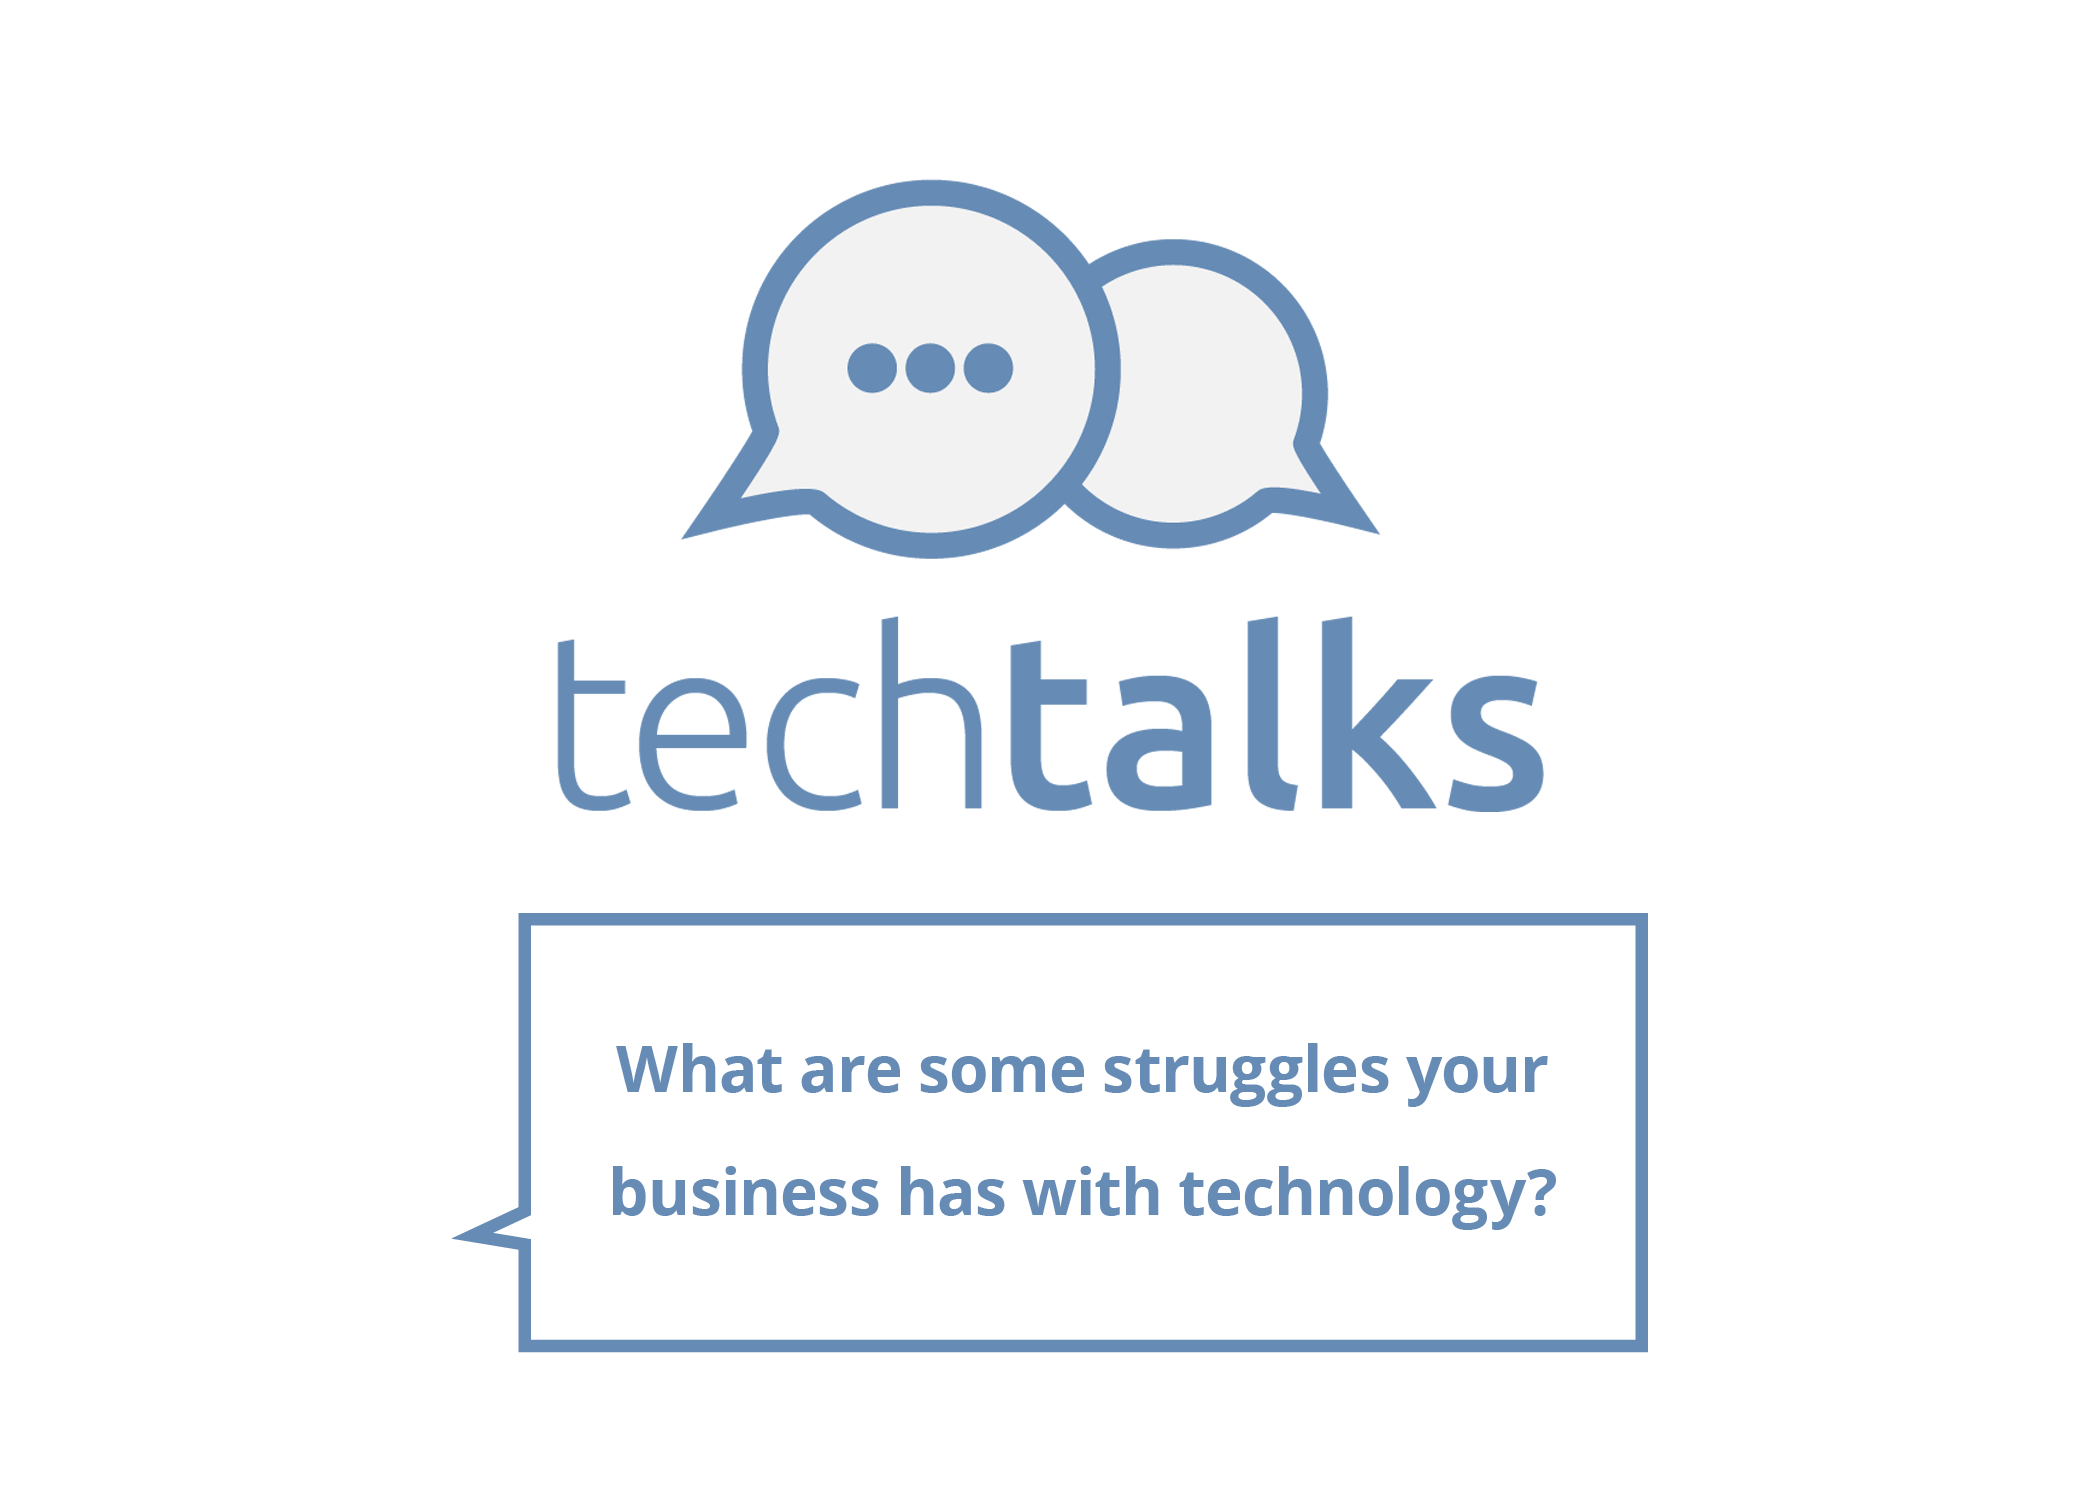 TechTalks discussion one